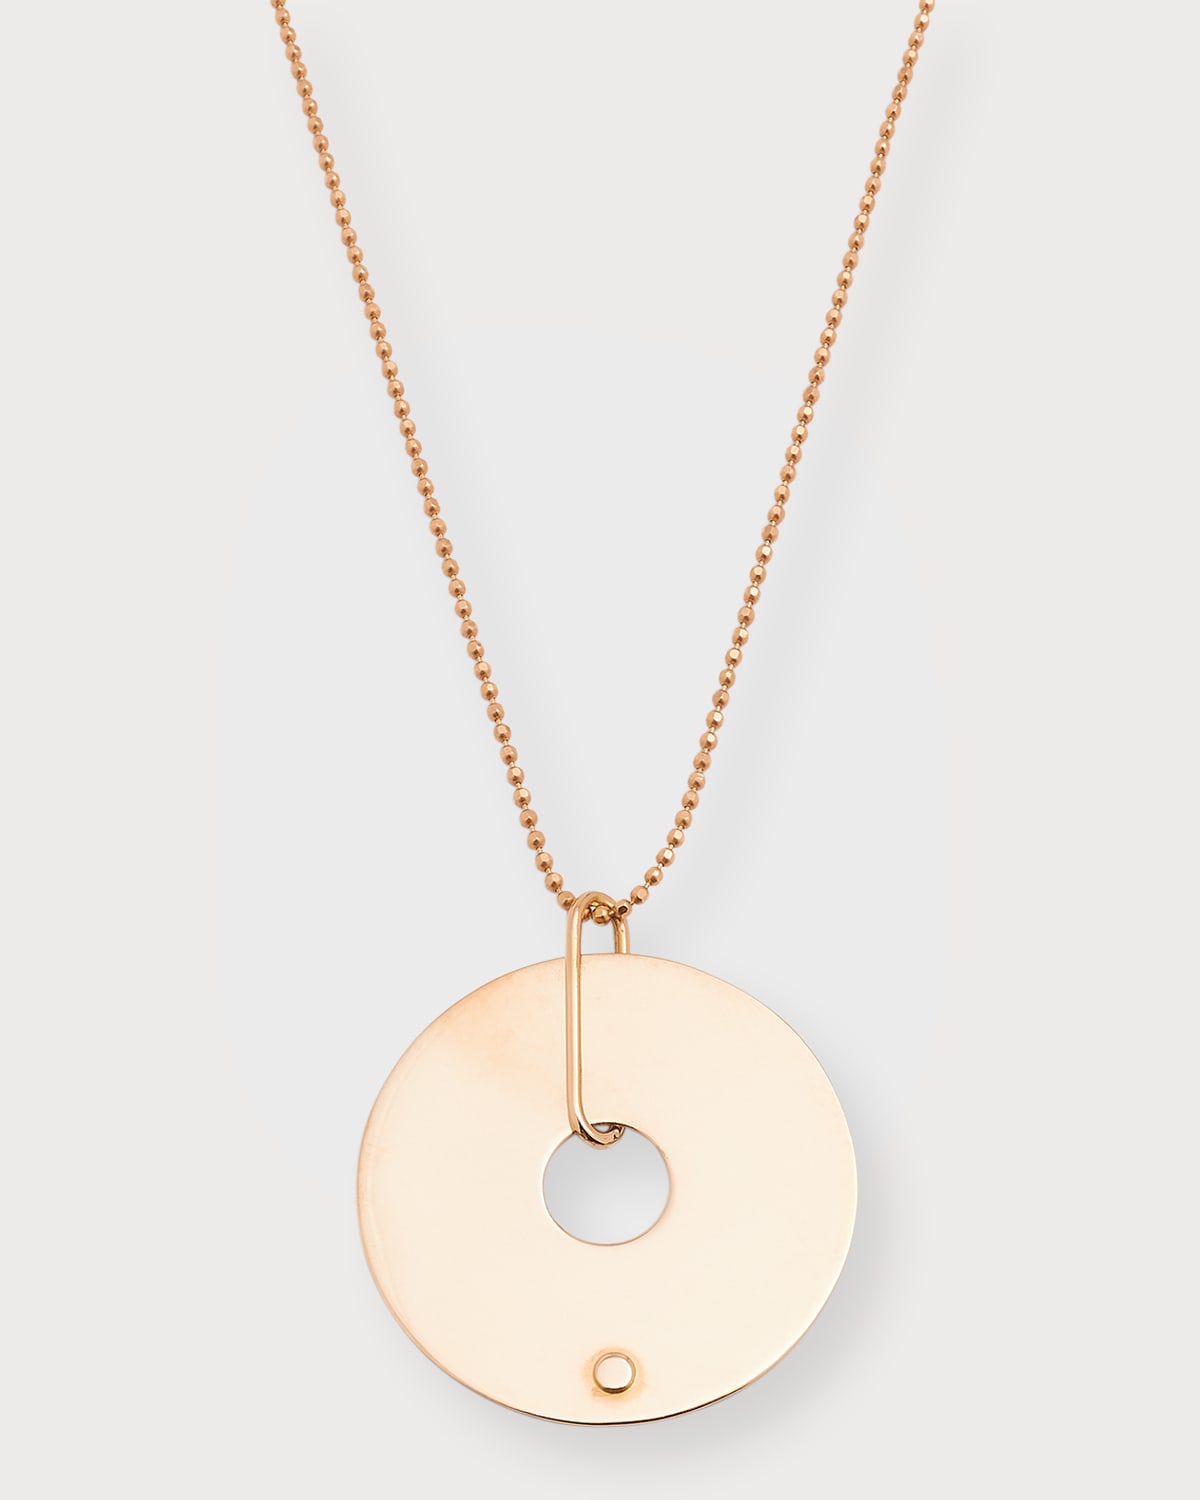 GINETTE NY 18K ROSE GOLD DONUT ON CHAIN NECKLACE